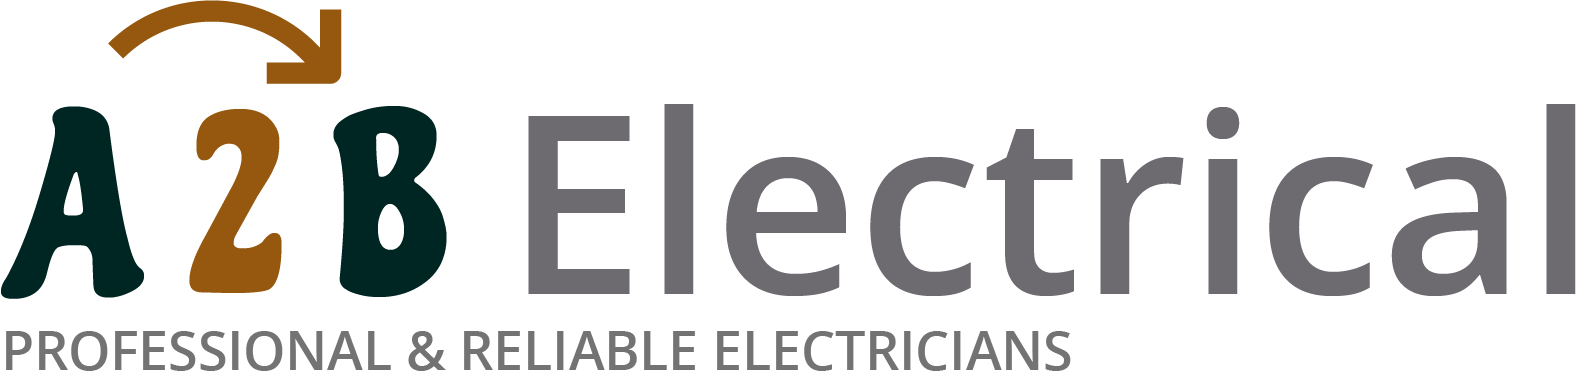 If you have electrical wiring problems in Elmstead, we can provide an electrician to have a look for you. 